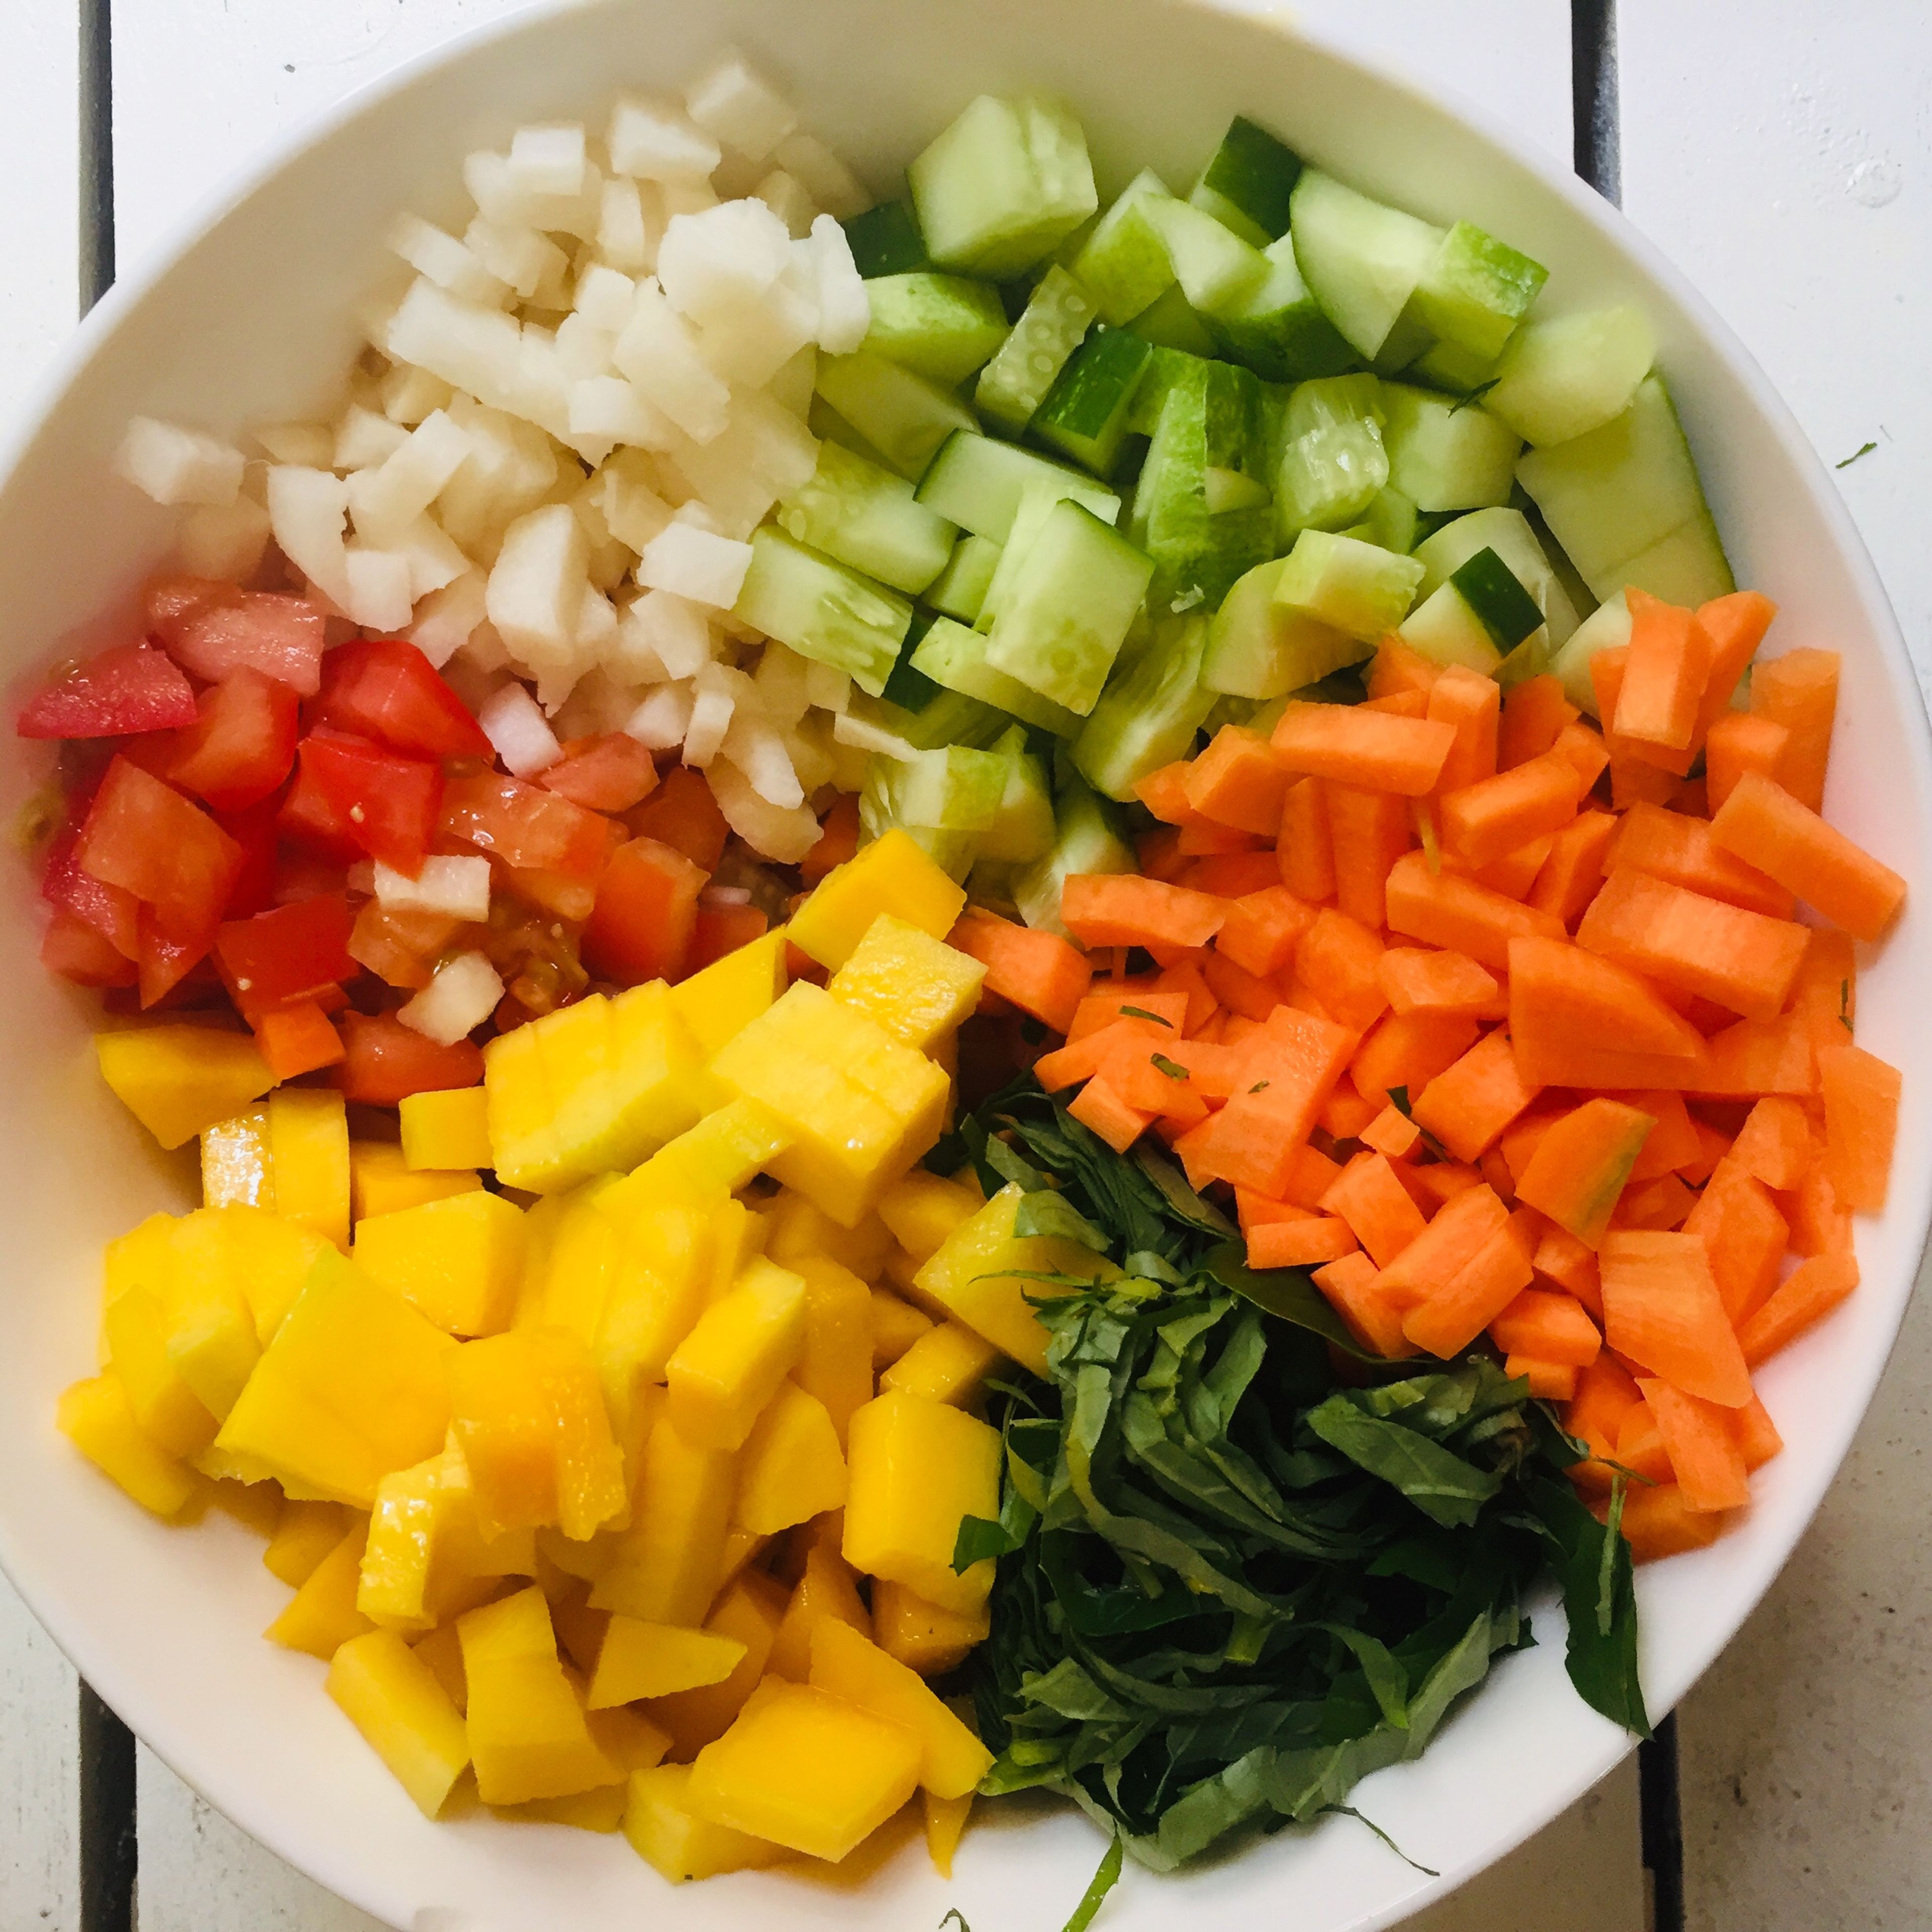 Cut the mango, tomato, jicama, cucumber and carrot into small cubes. As for the piper lolot leaves, stack the leaves together and fold them into a straw shape, then slice the leaf straw into thin strips. Put everything into a large bowl.